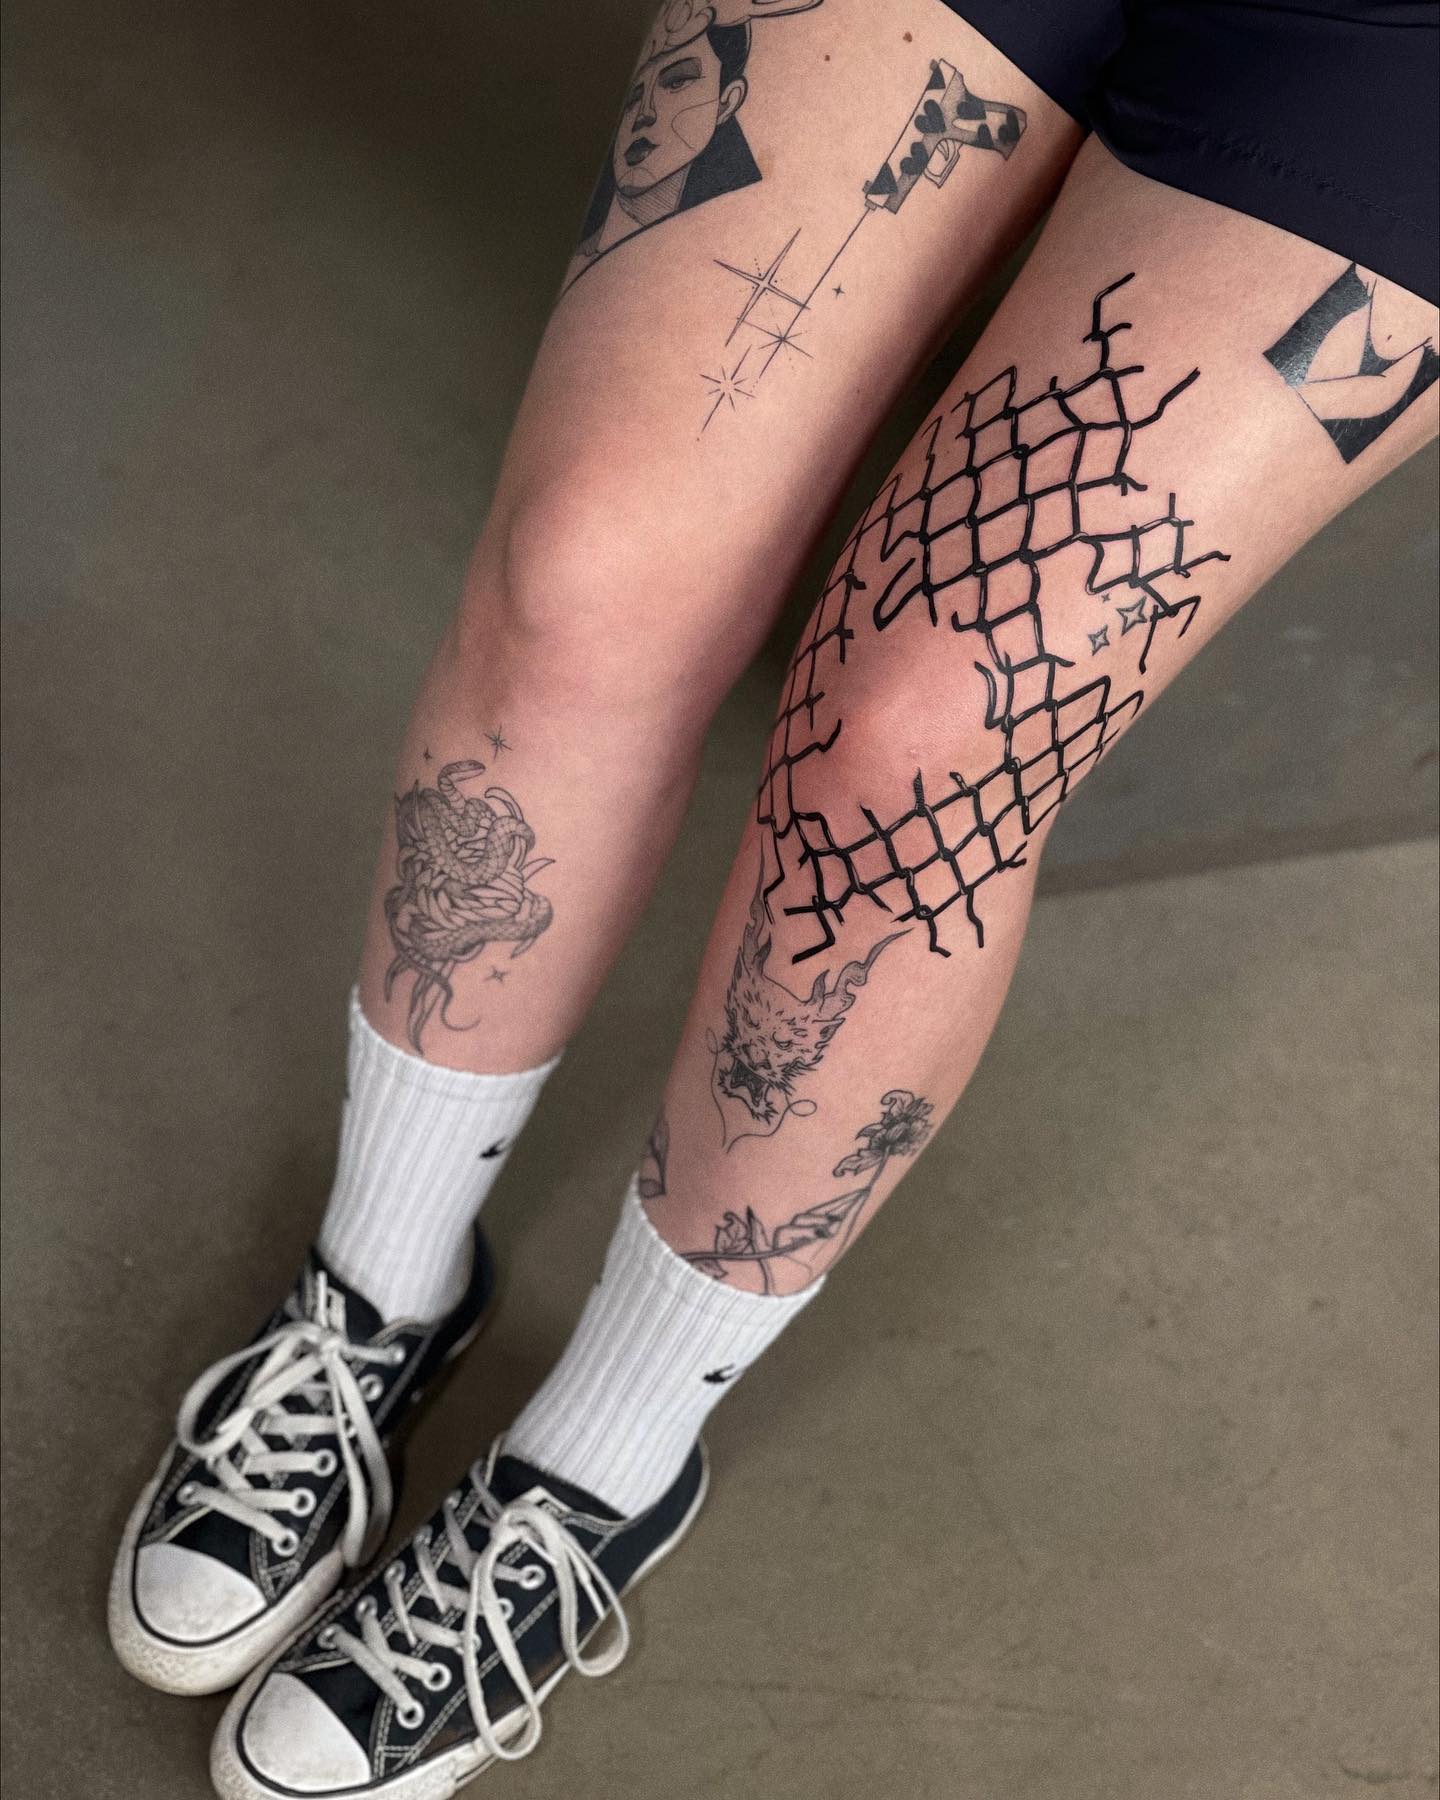 Big, loud, and dominant, this knee tattoo is for those who want to look bold and catchy. The truth is that this giant design can take a couple of hours to do. It is a masterpiece that shows your love for precision and bolder statements. Don’t you wish to give it a go?